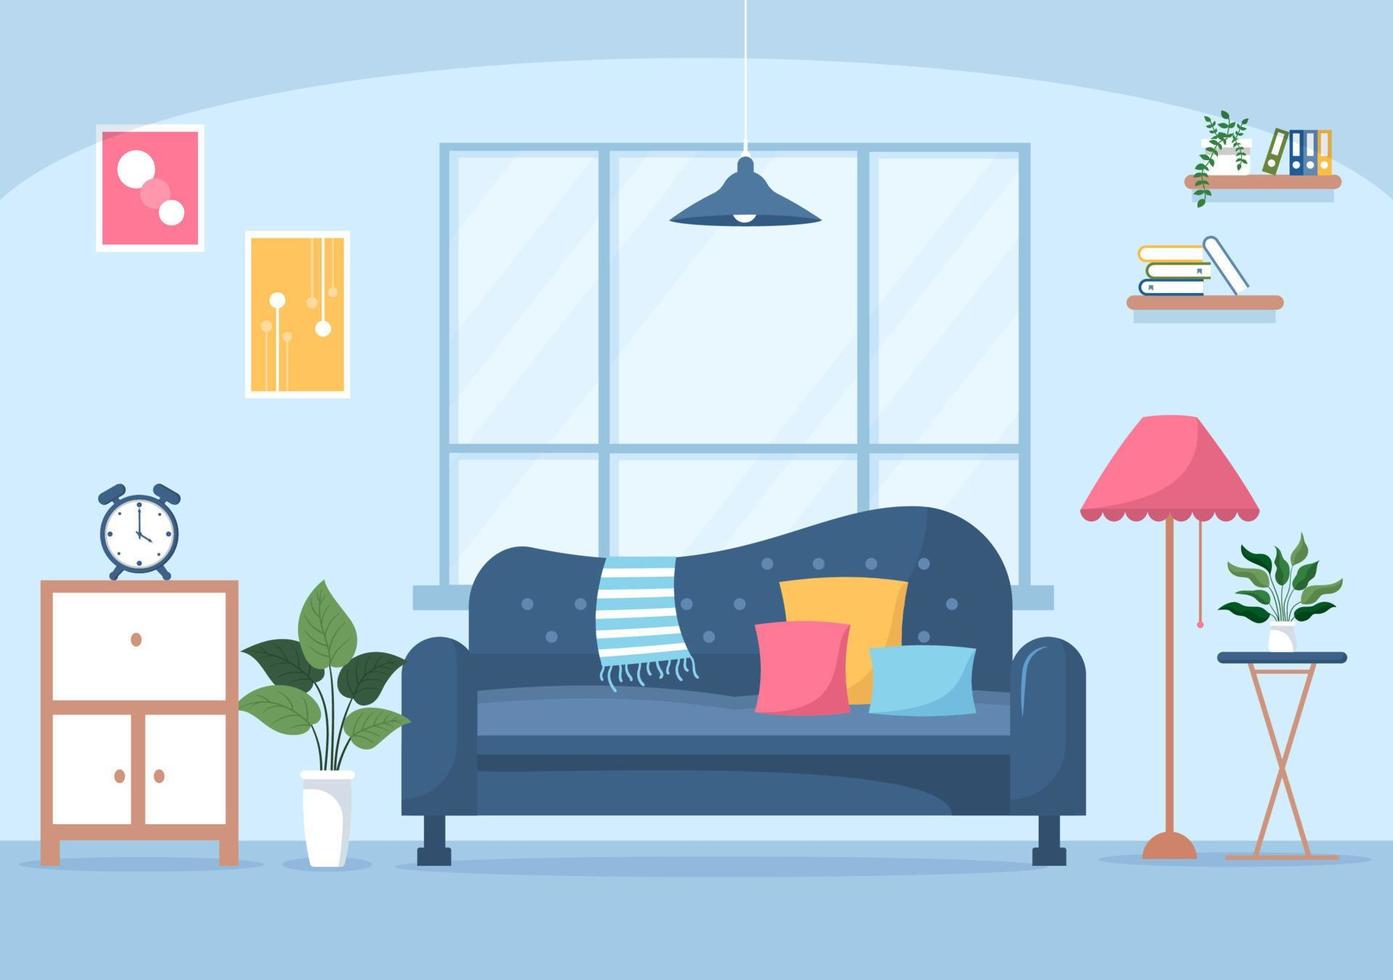 Home Furniture Flat Design Illustration for the Living Room to be Comfortable Like a Sofa, Desk, Cupboard, Lights, Plants and Wall Hangings vector